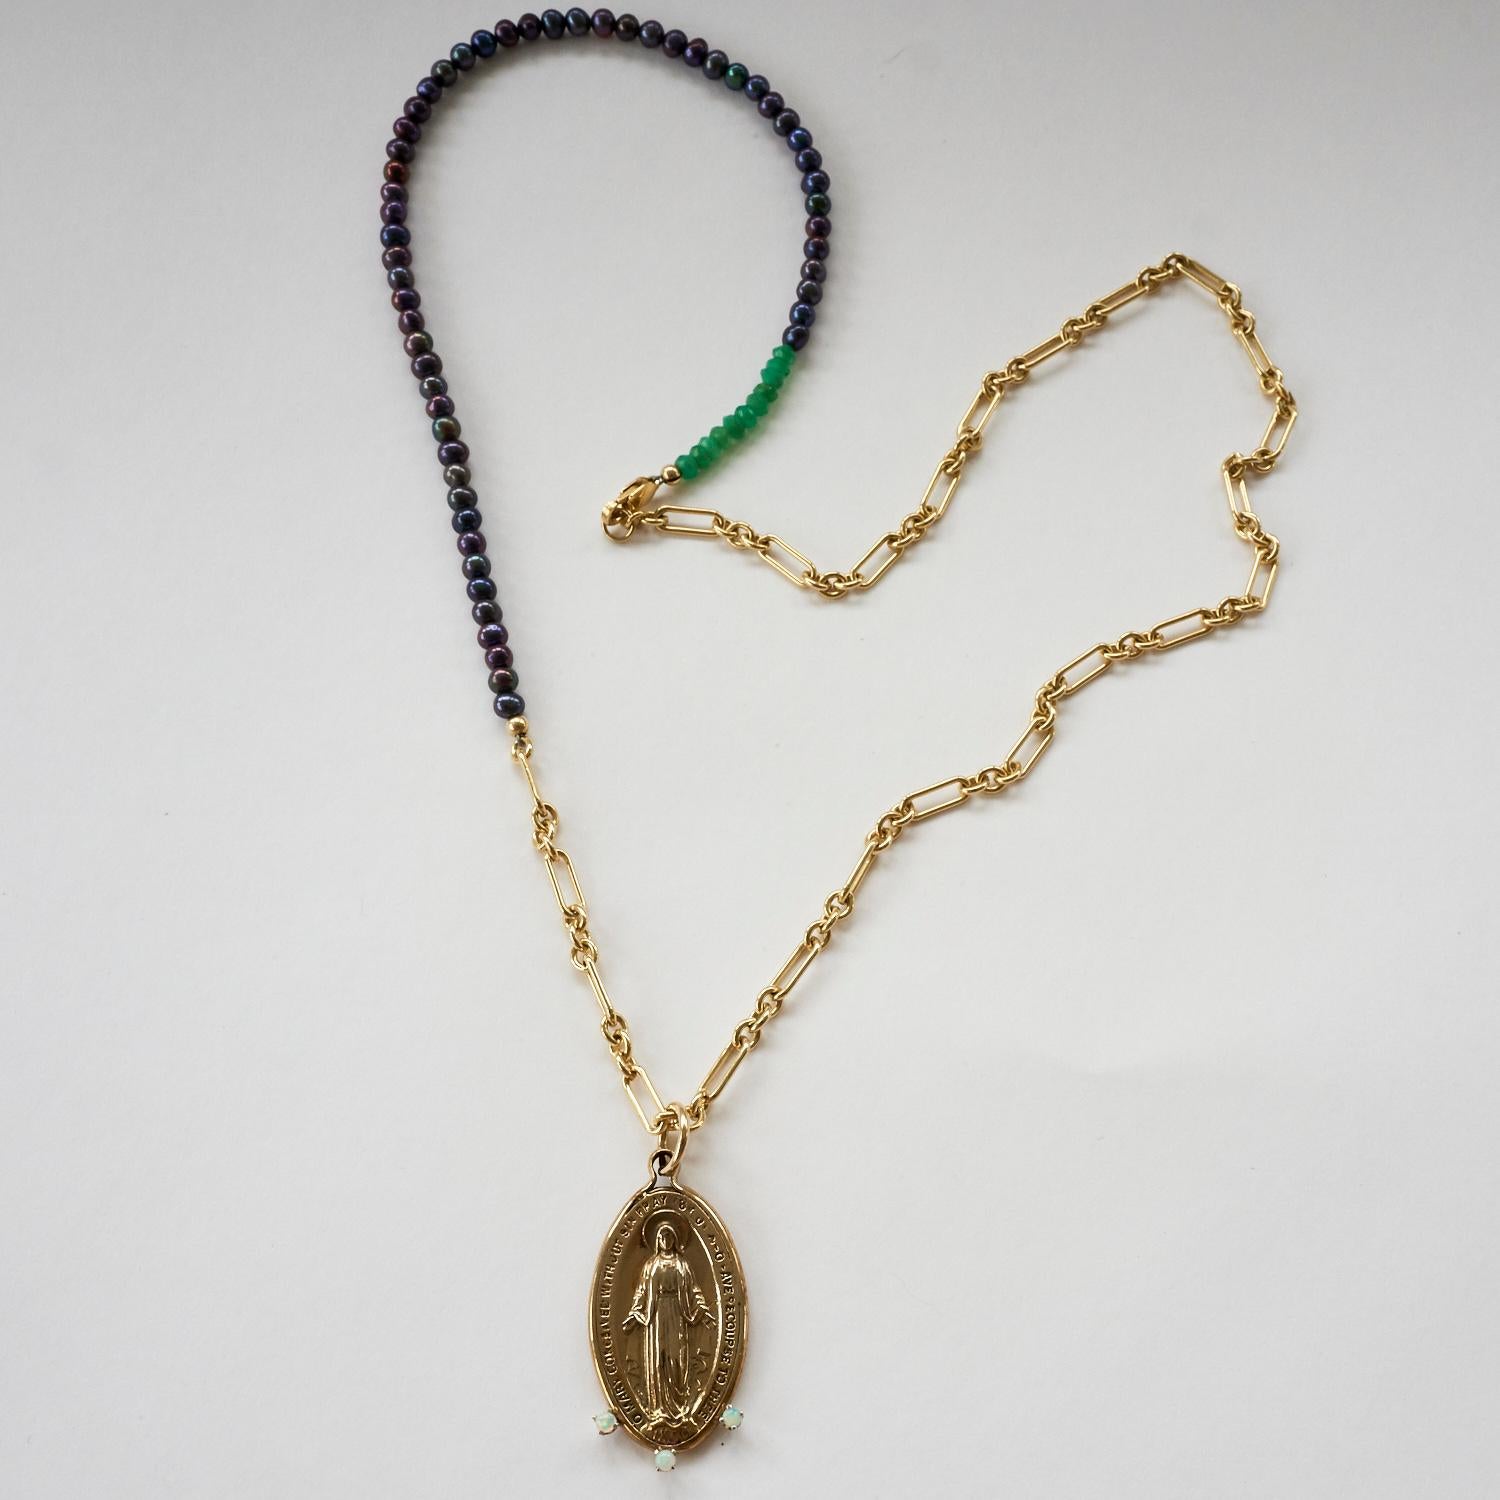 Medal Necklace Chain Virgin Mary Black Pearl Long Chain J dauphin In New Condition For Sale In Los Angeles, CA